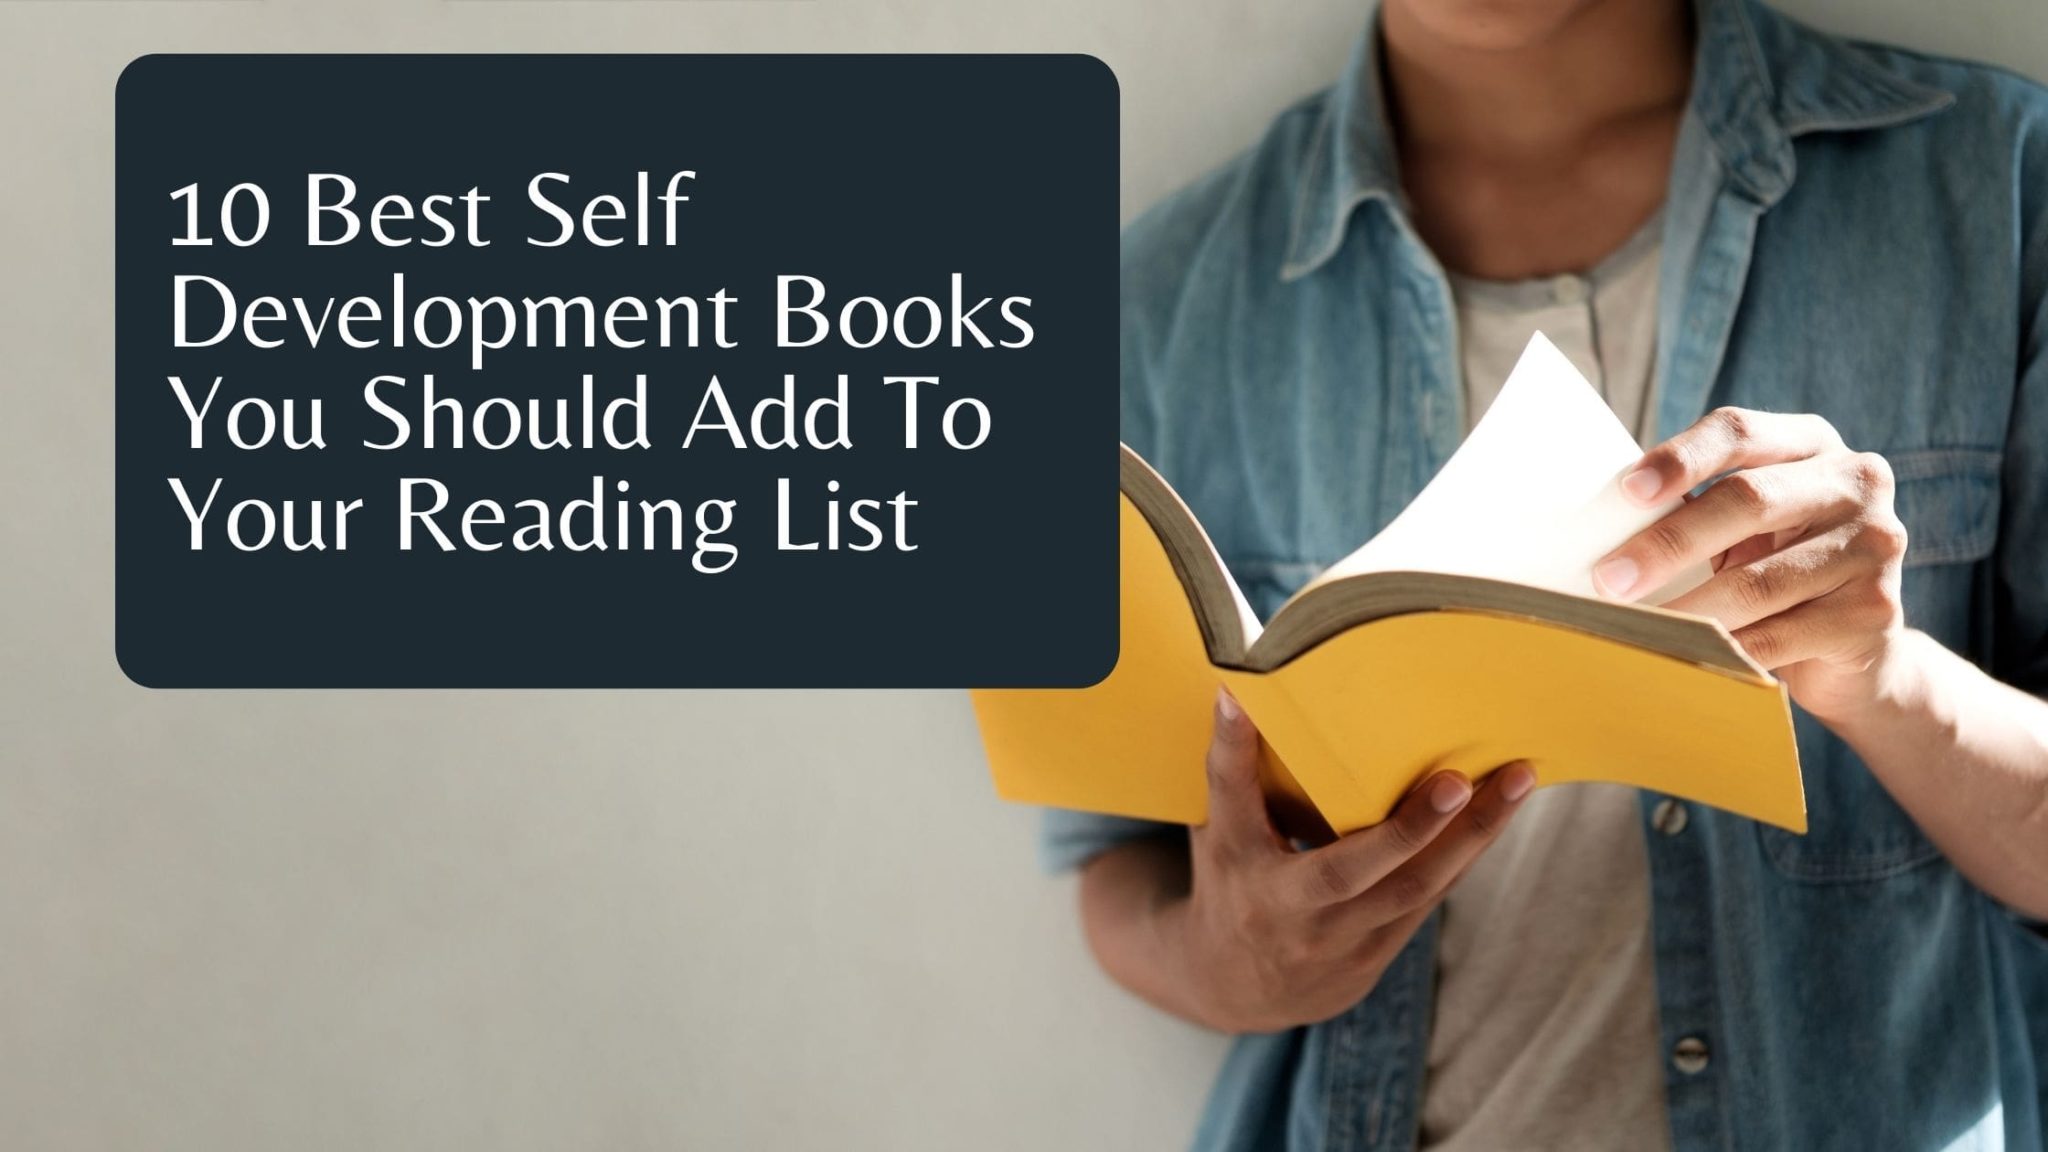 Top 10 Best Self Development Books You Should Add To Your Reading List